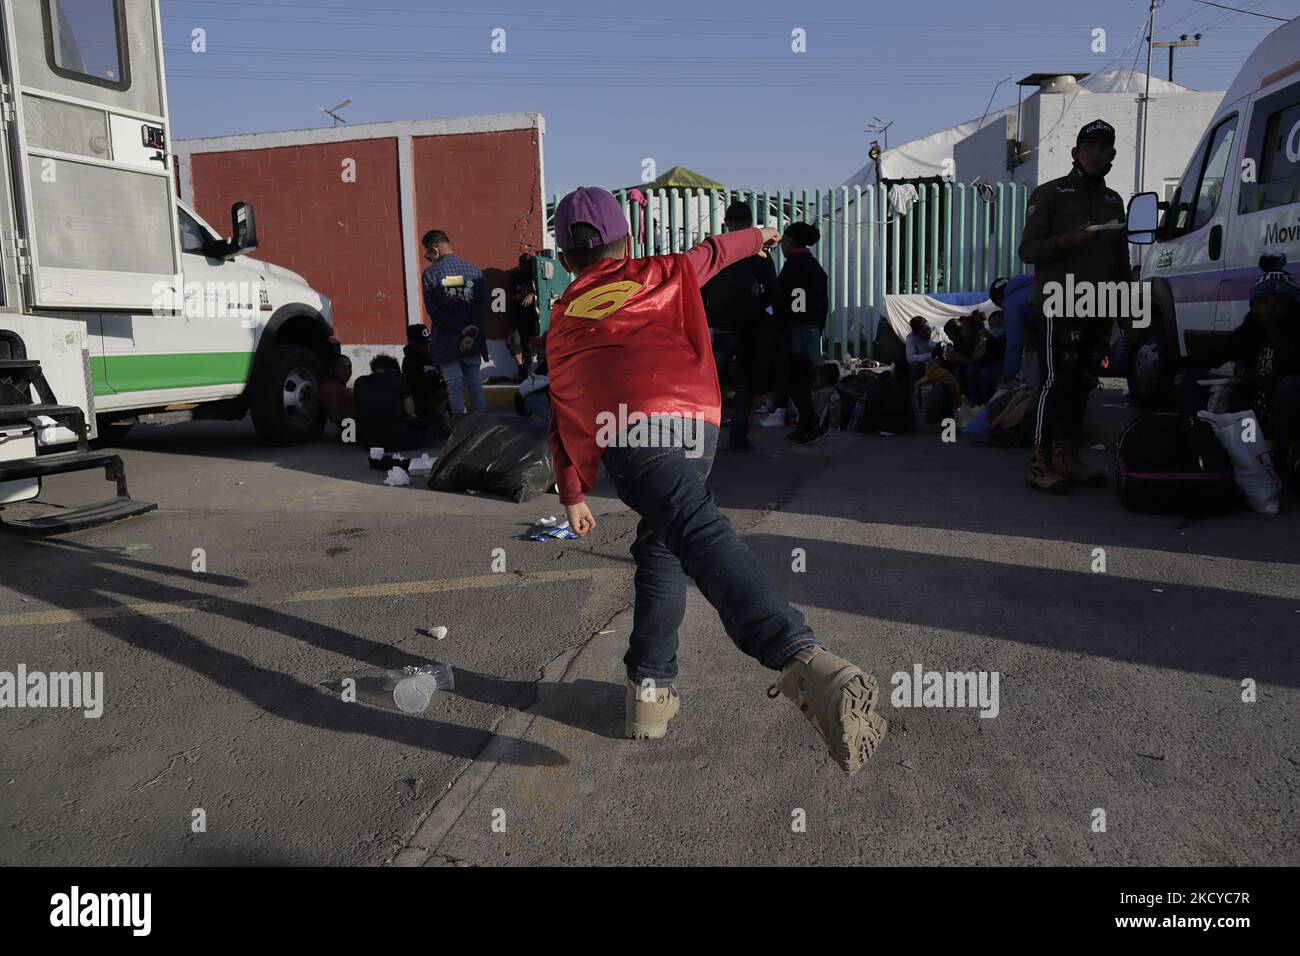 A child from the migrant caravan plays before boarding a bus in the car park of the Casa Peregrino, Mexico City, bound for northern Mexico where the processing of humanitarian visas will continue after negotiations and agreements with the Mexican government. (Photo by Gerardo Vieyra/NurPhoto) Stock Photo